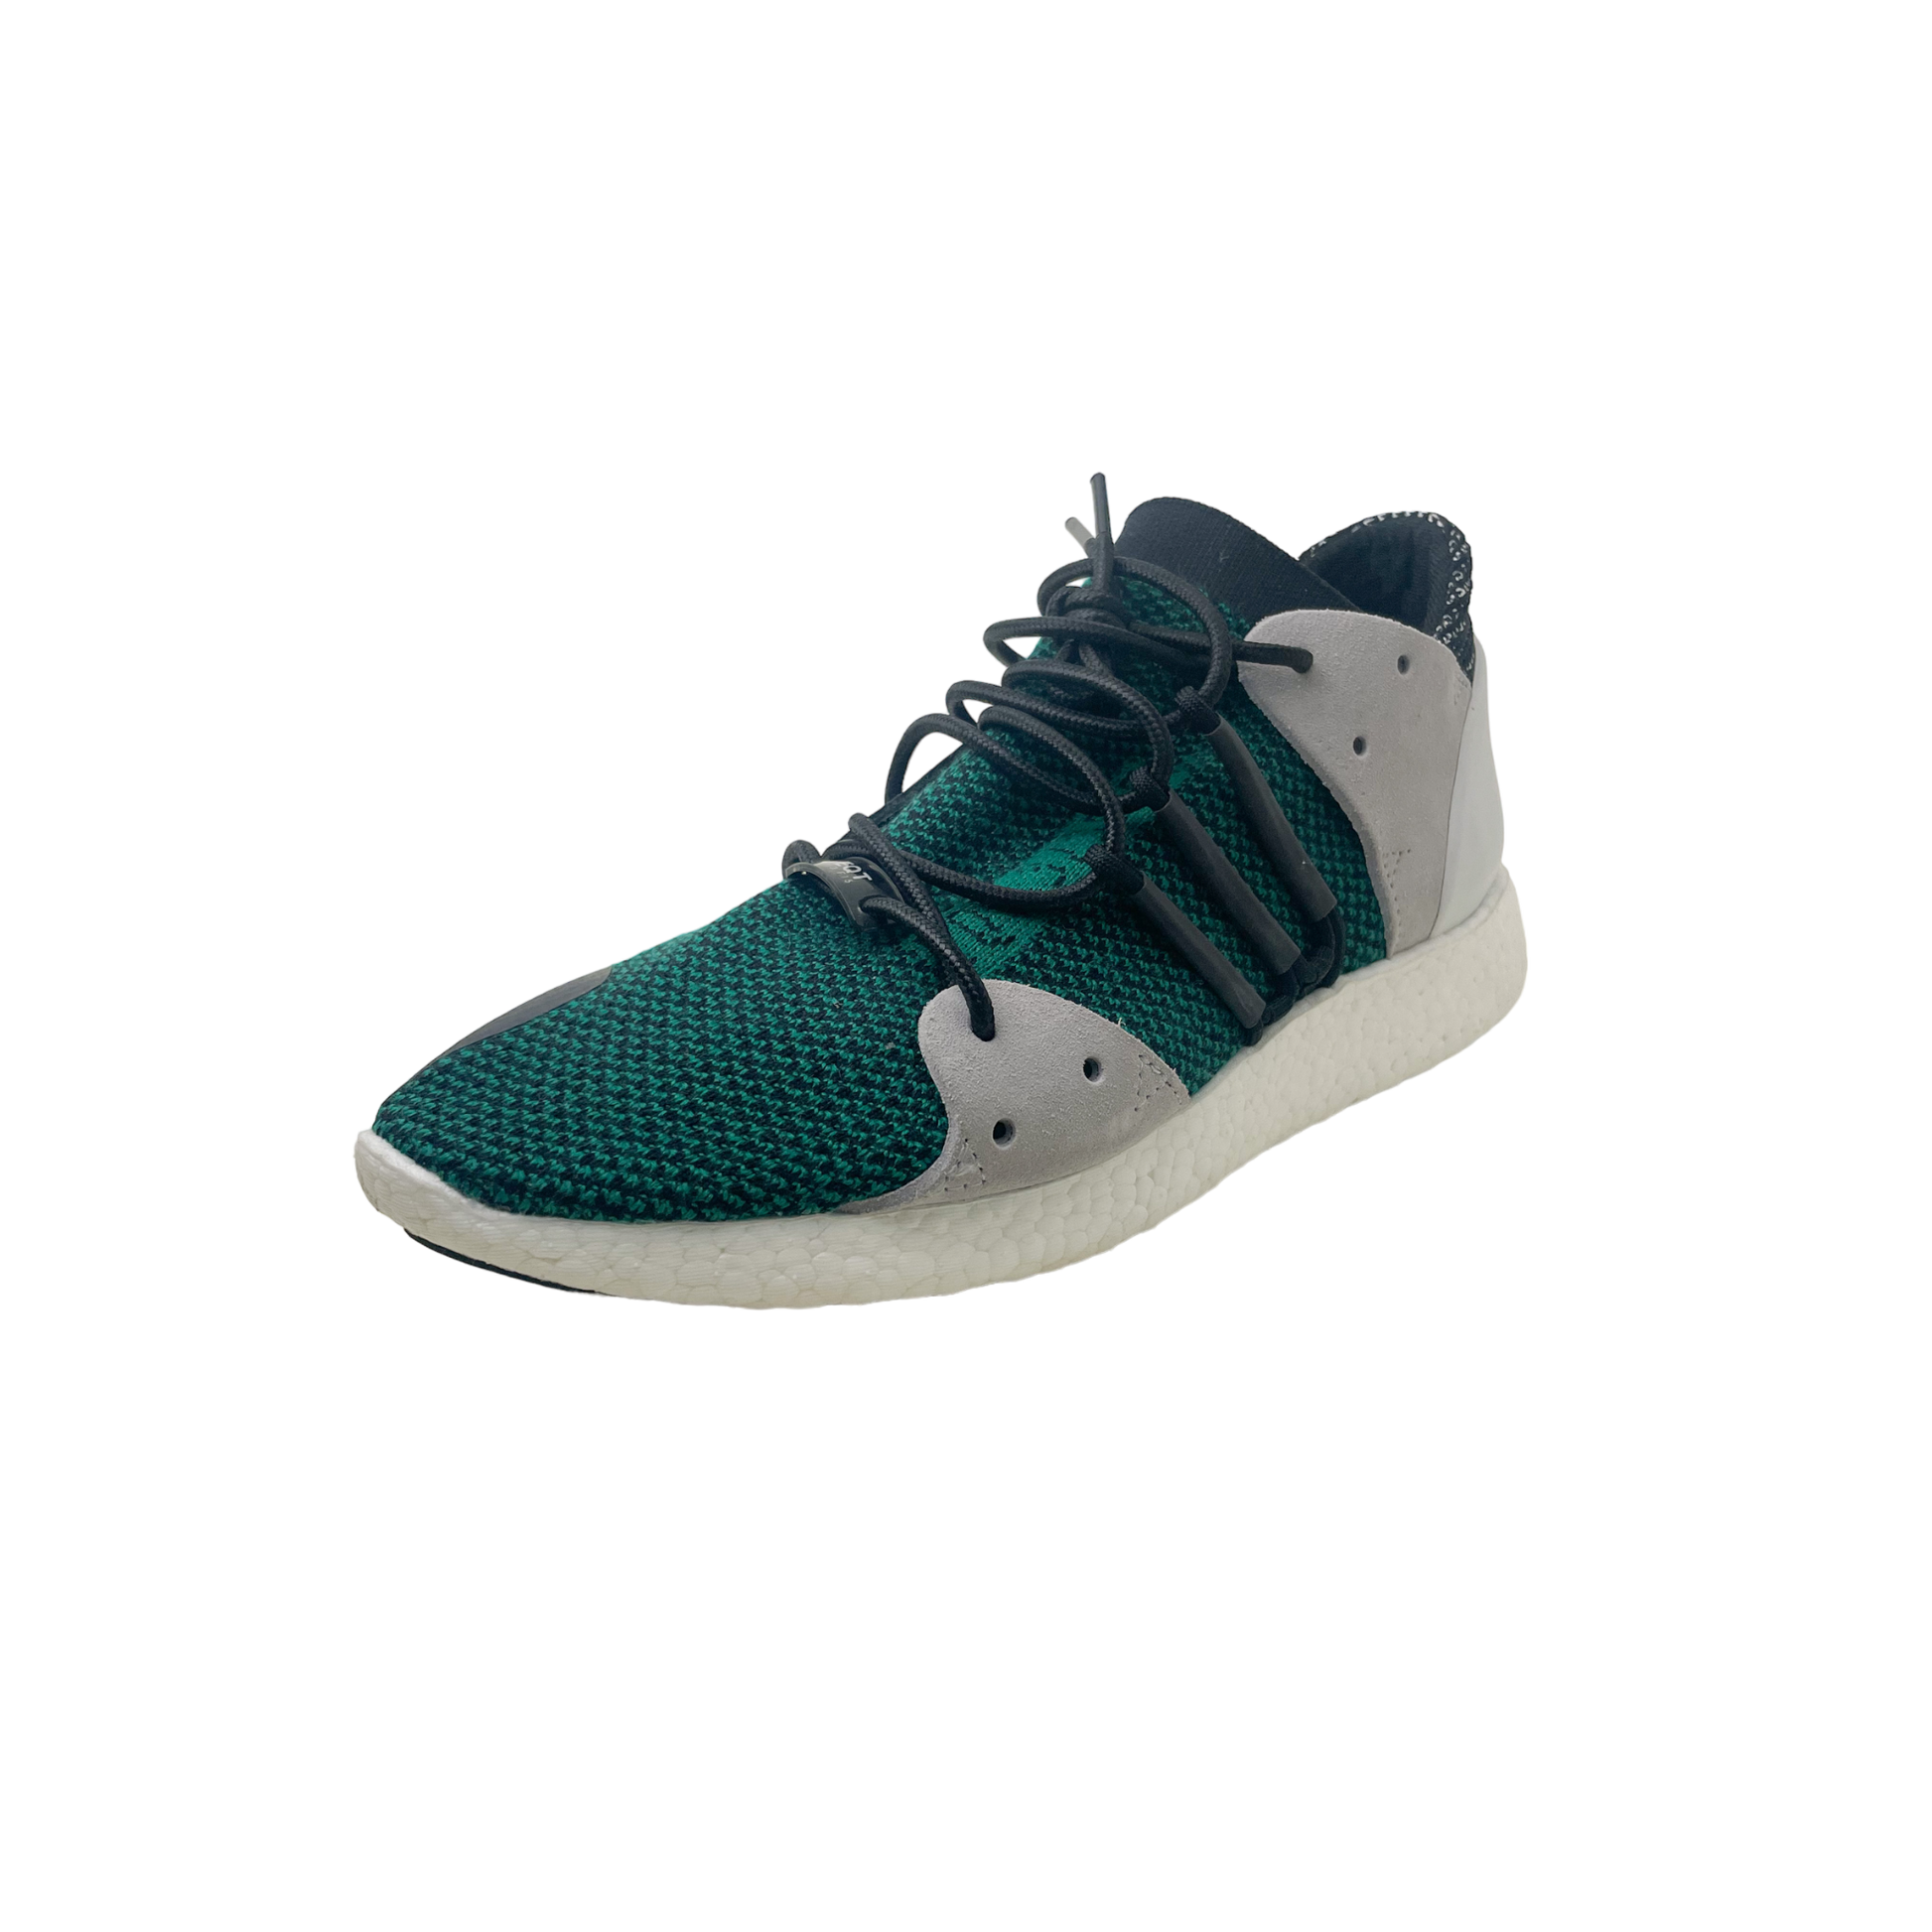 Adidas EQT 3/3 F15 OG Pack Sub Green (Used/Refreshed) SOL*D. / THE VAULT